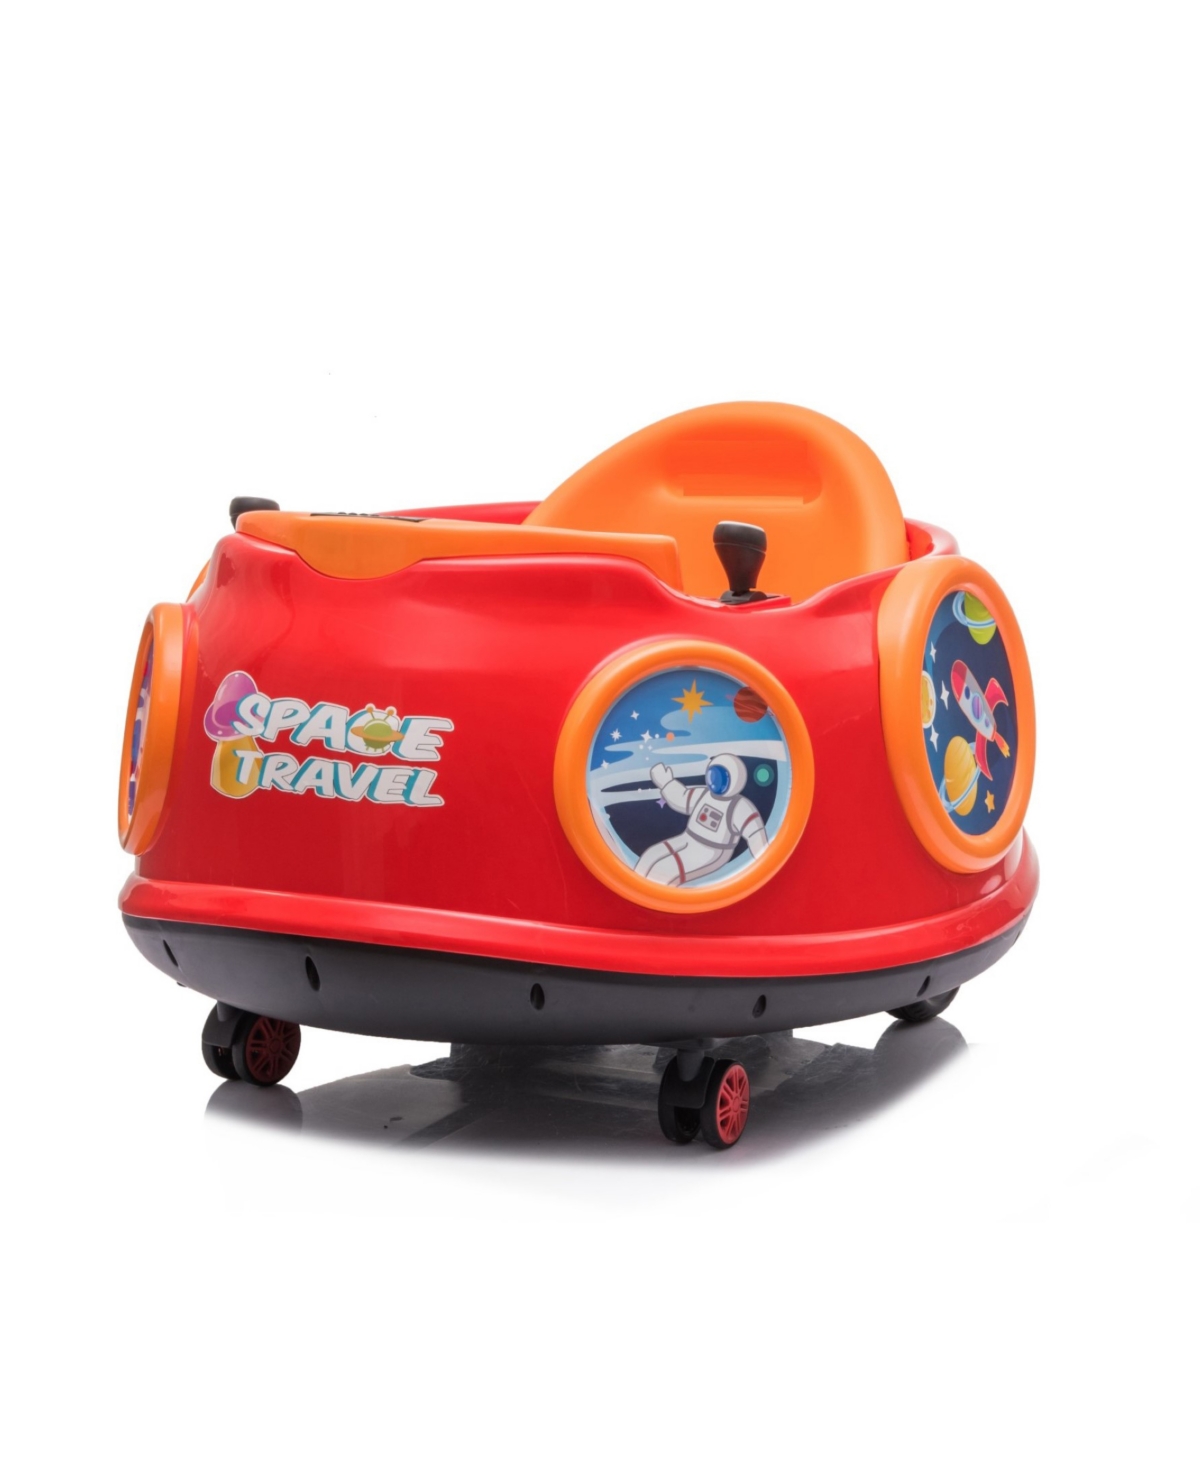 Freddo Toys 1 Seater Ride On Bumper Car In Red